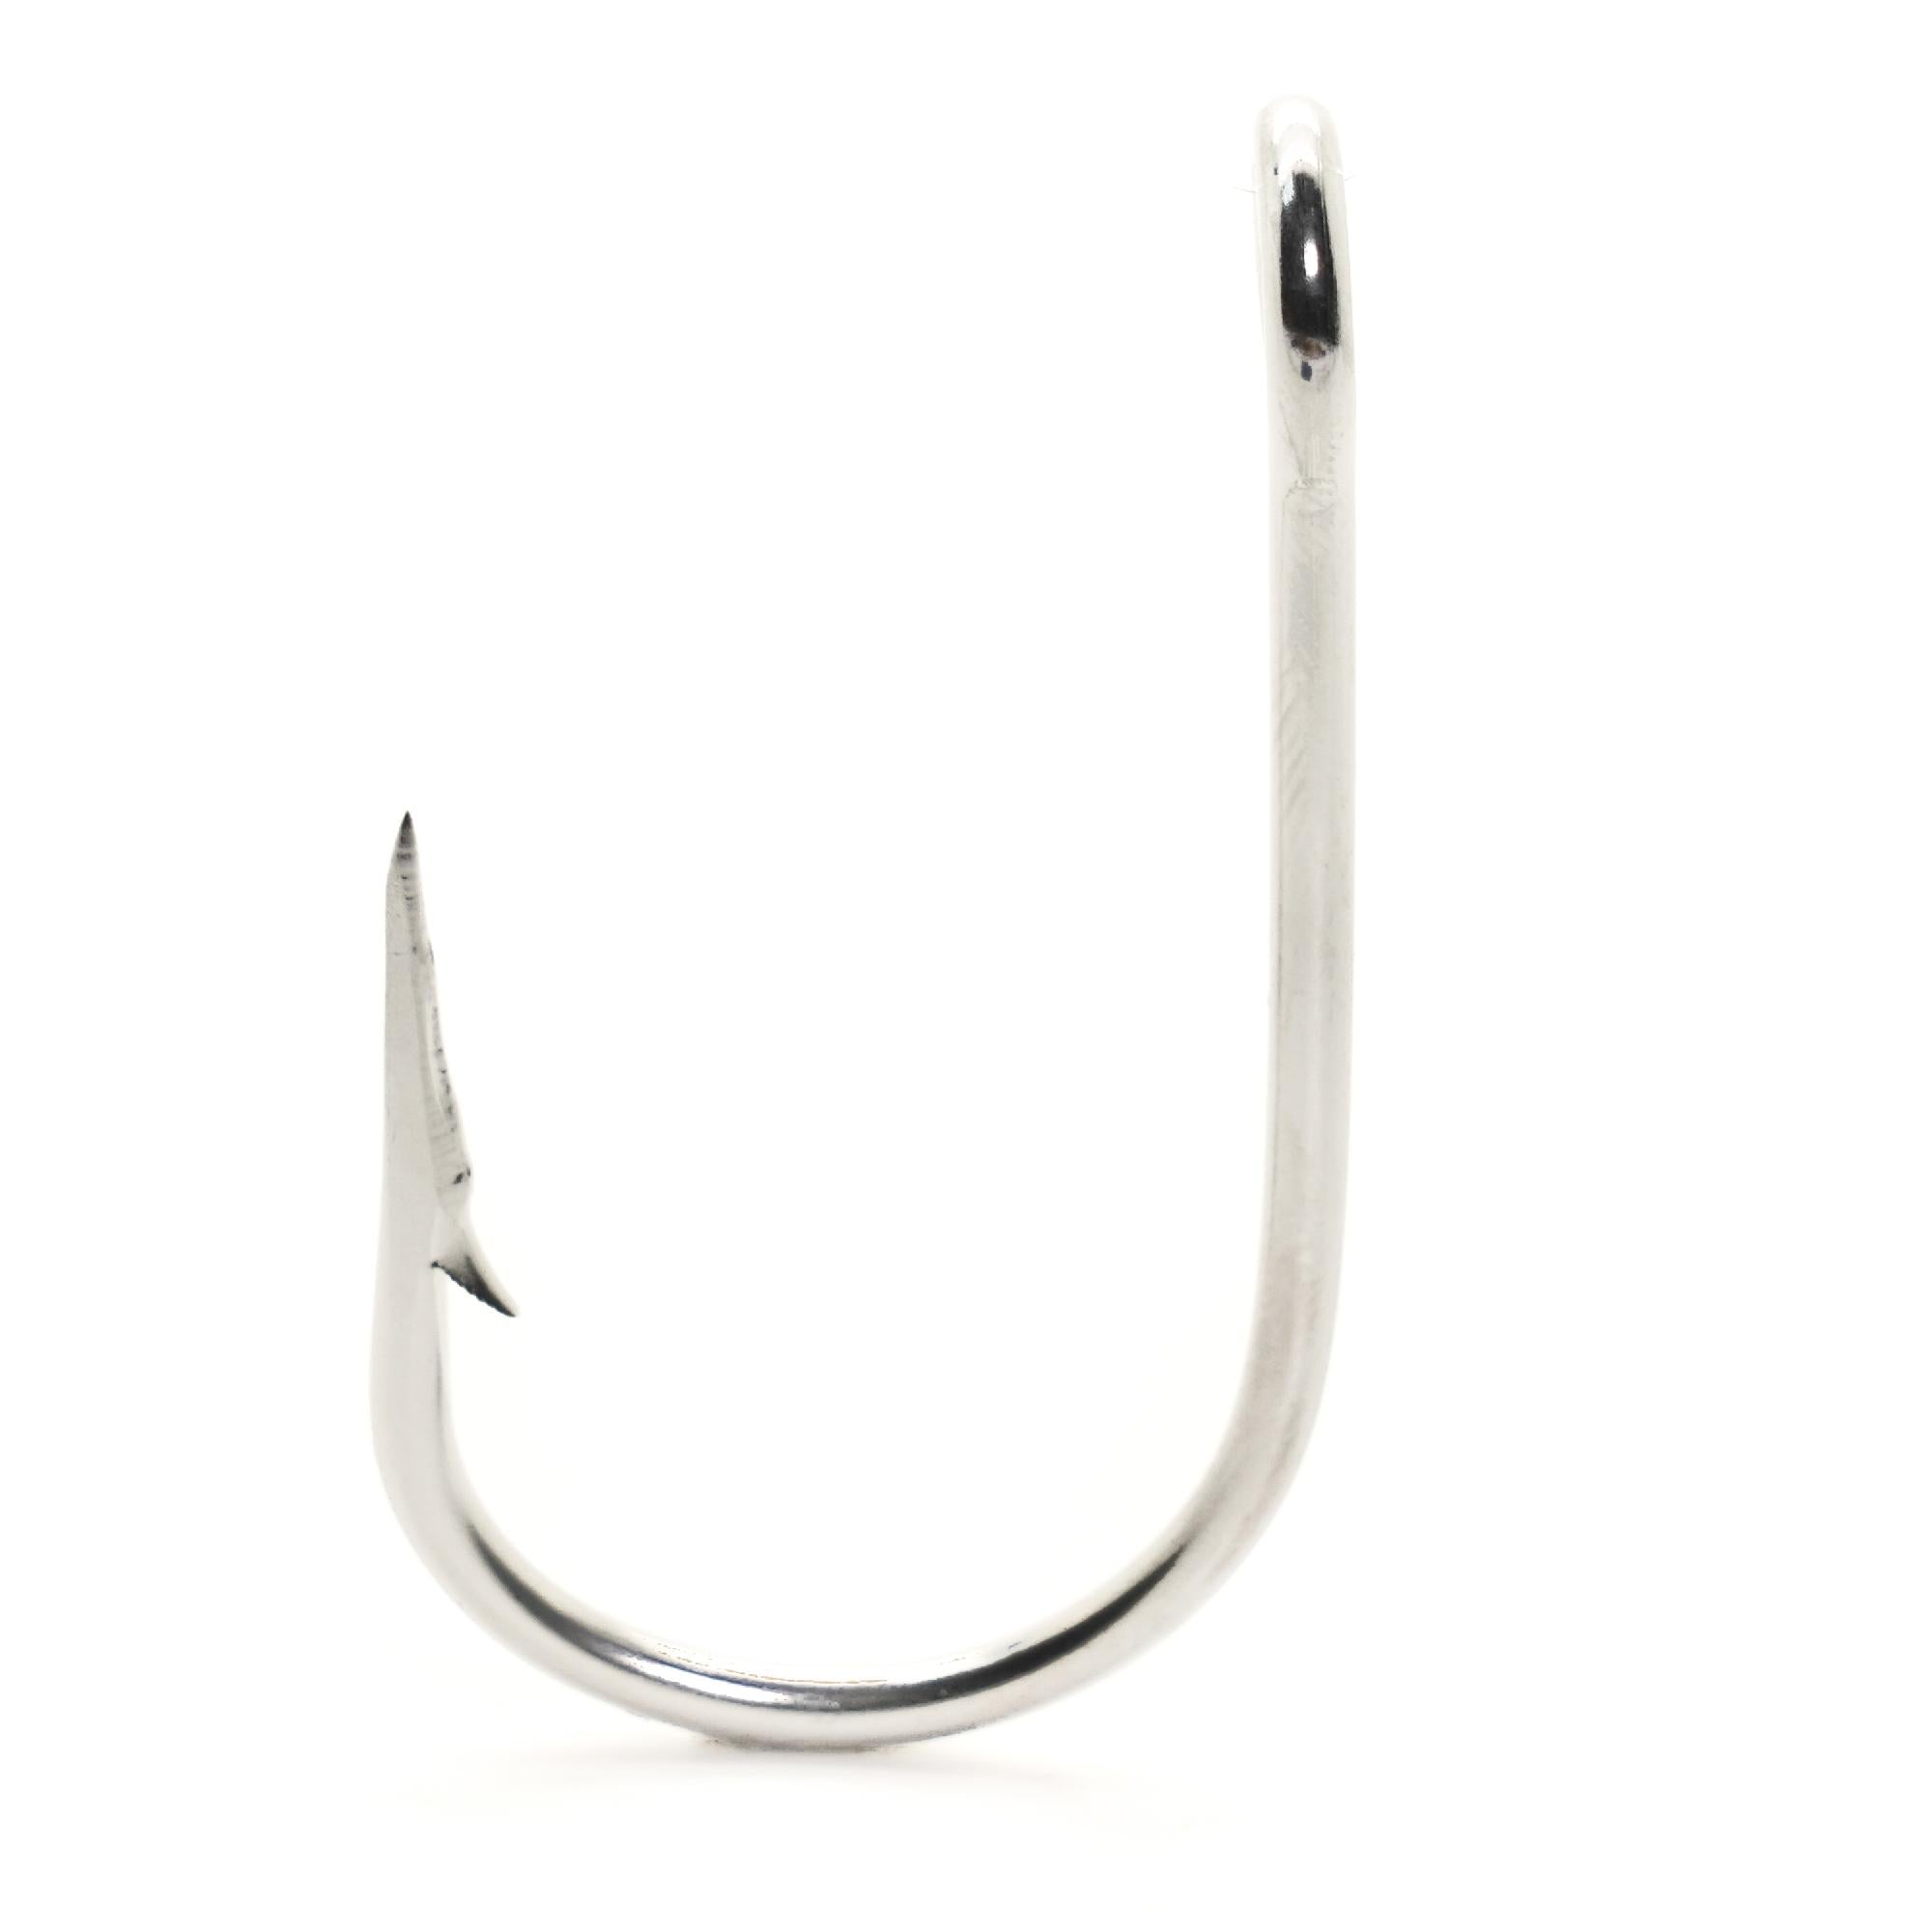 Ron's Striper Candy Fish Hooks VMC 9171 Siwash with a Bucktail